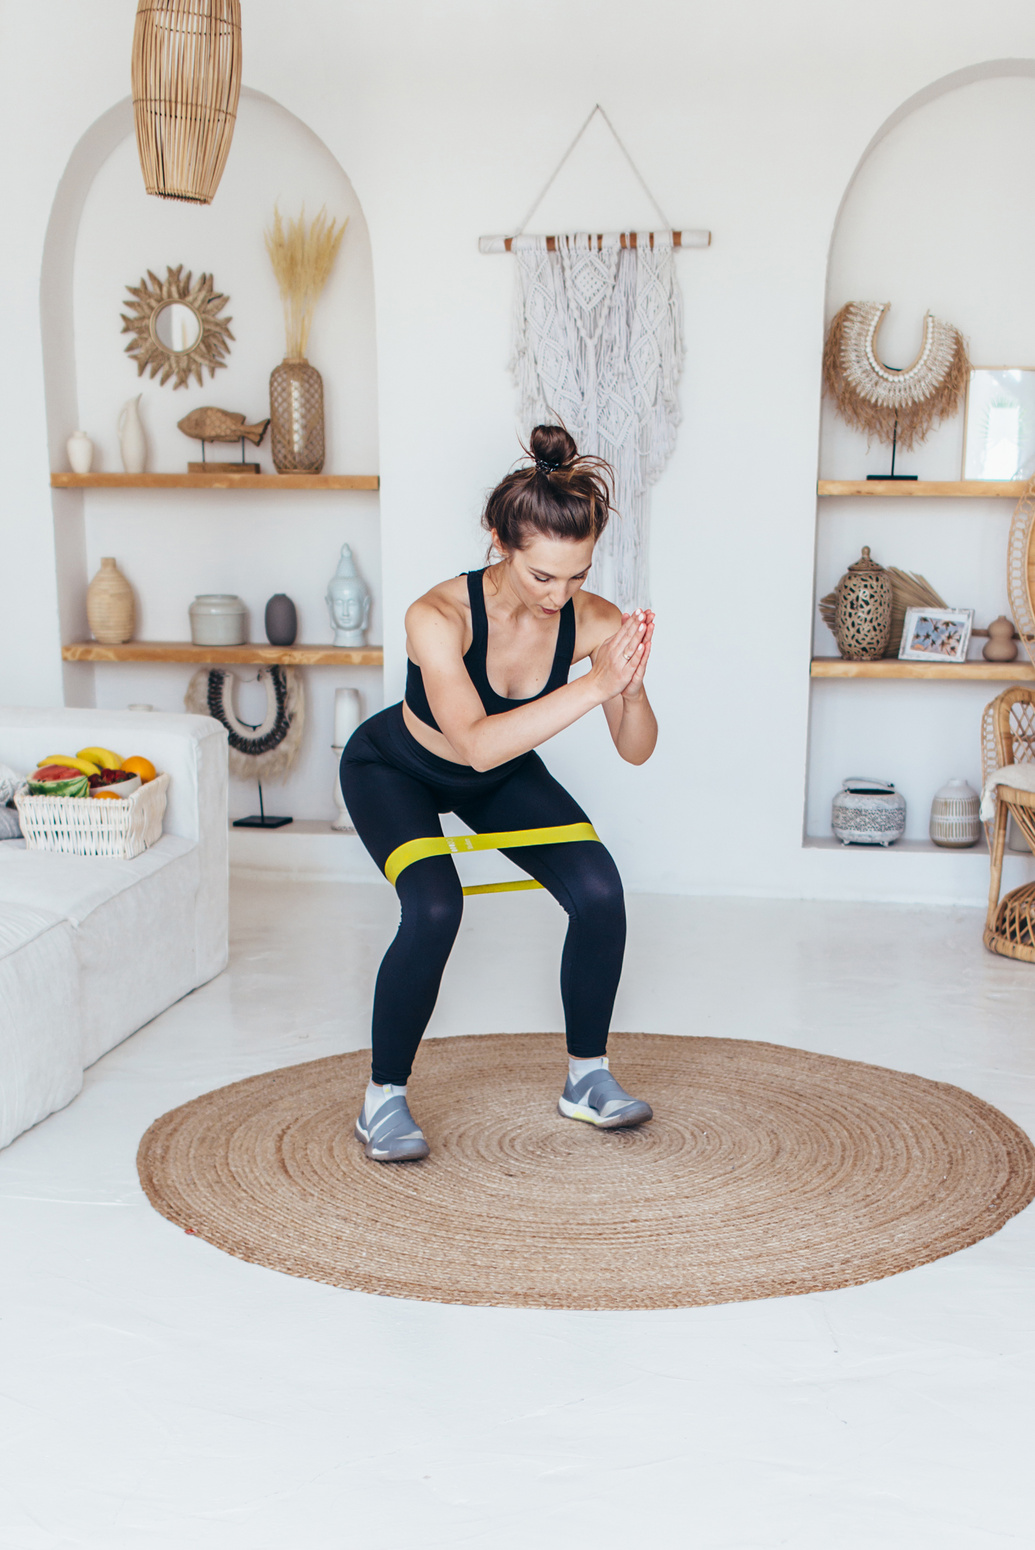 Woman Working Out at Home Doing Squats with Elastic Band.